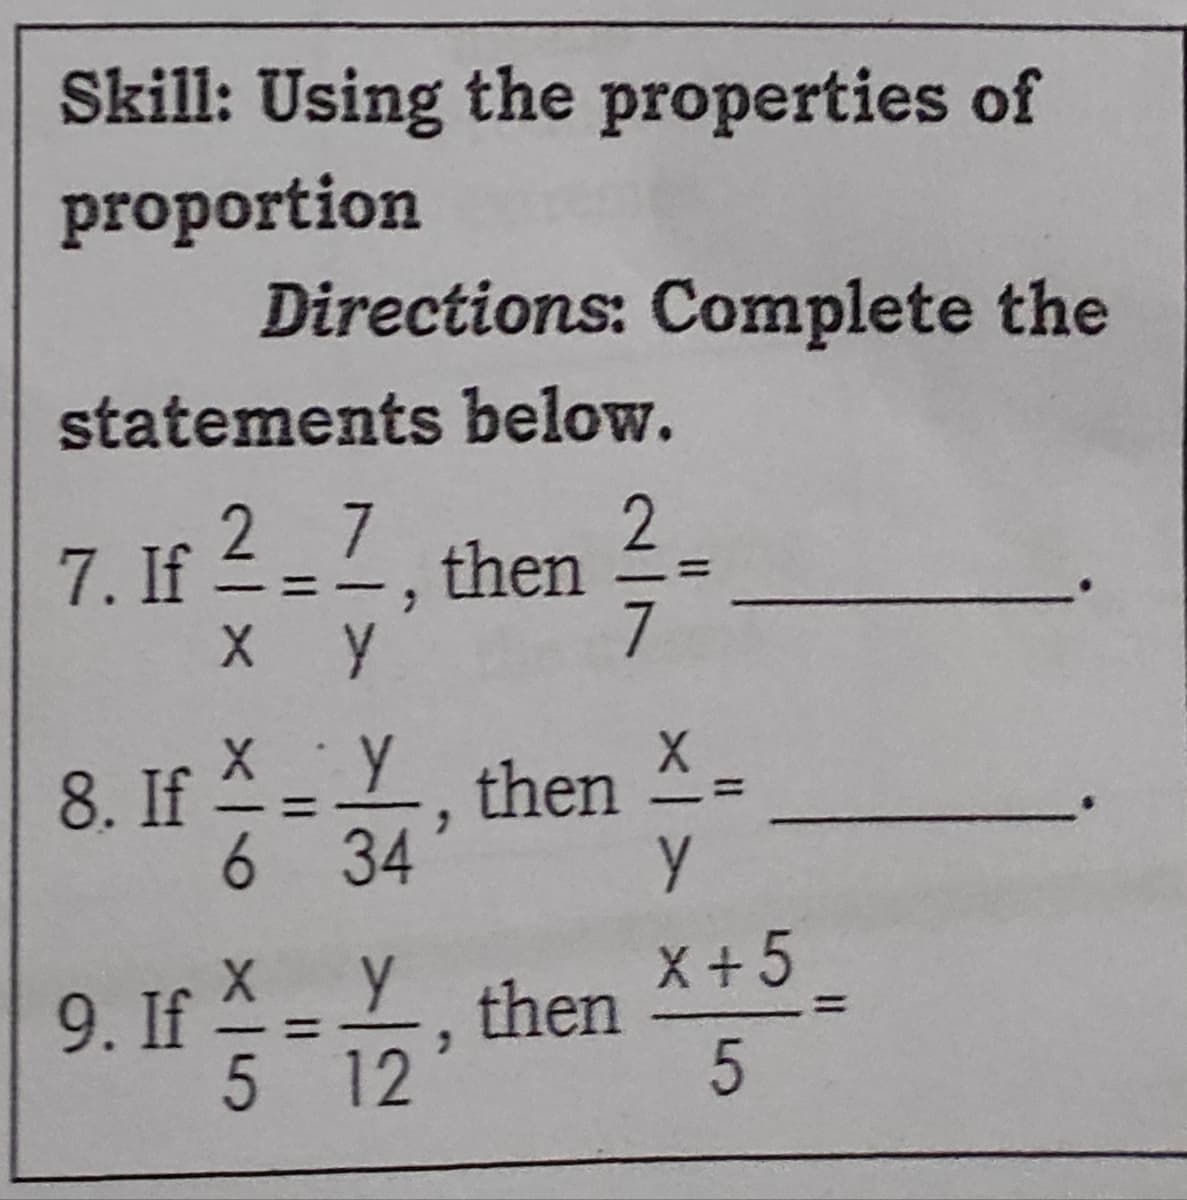 Skill: Using the properties of
proportion
Directions: Complete the
statements below.
7
7. If 2=2, then =
X Y
7
8. If X Y
then
6 34
9. If
5 12
X +5
then
5
